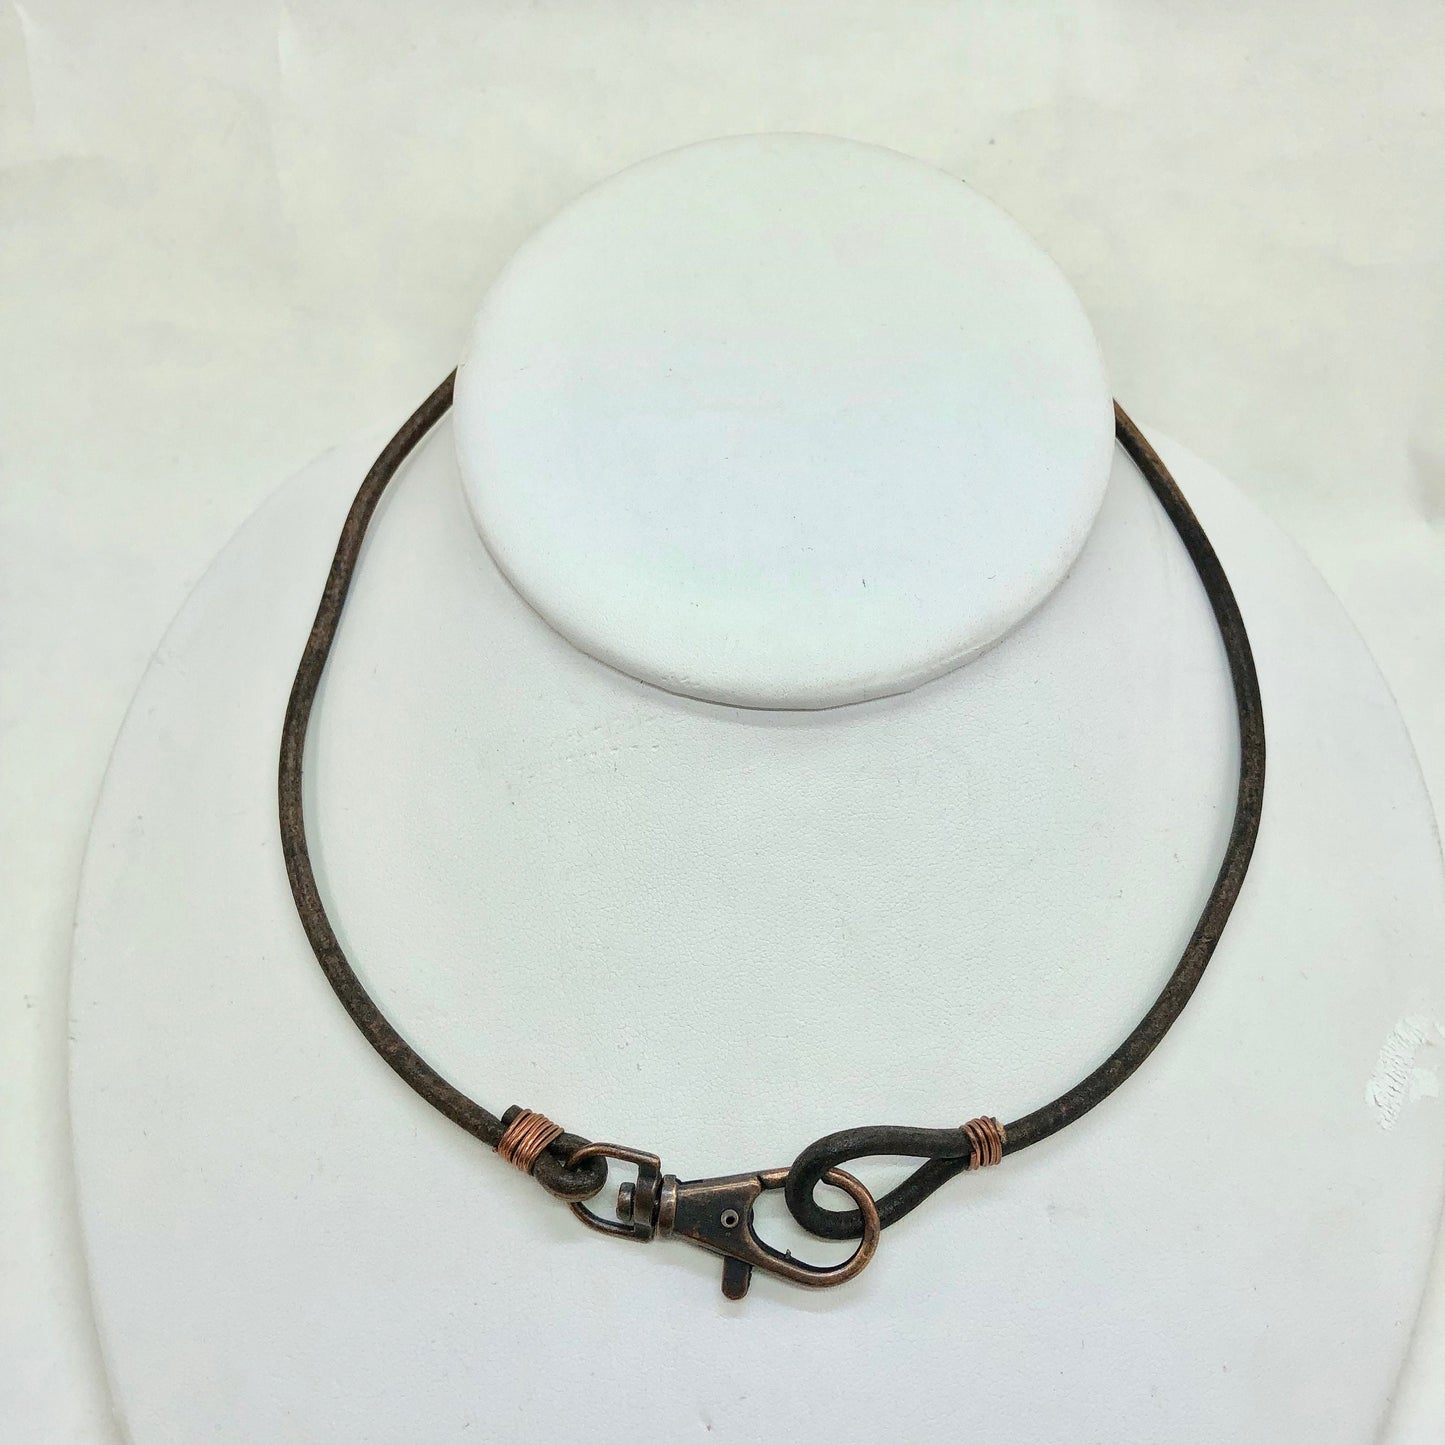 Leather Necklace with large copper lobster clasp as focal design. Distressed Italian dark brown soft leather.